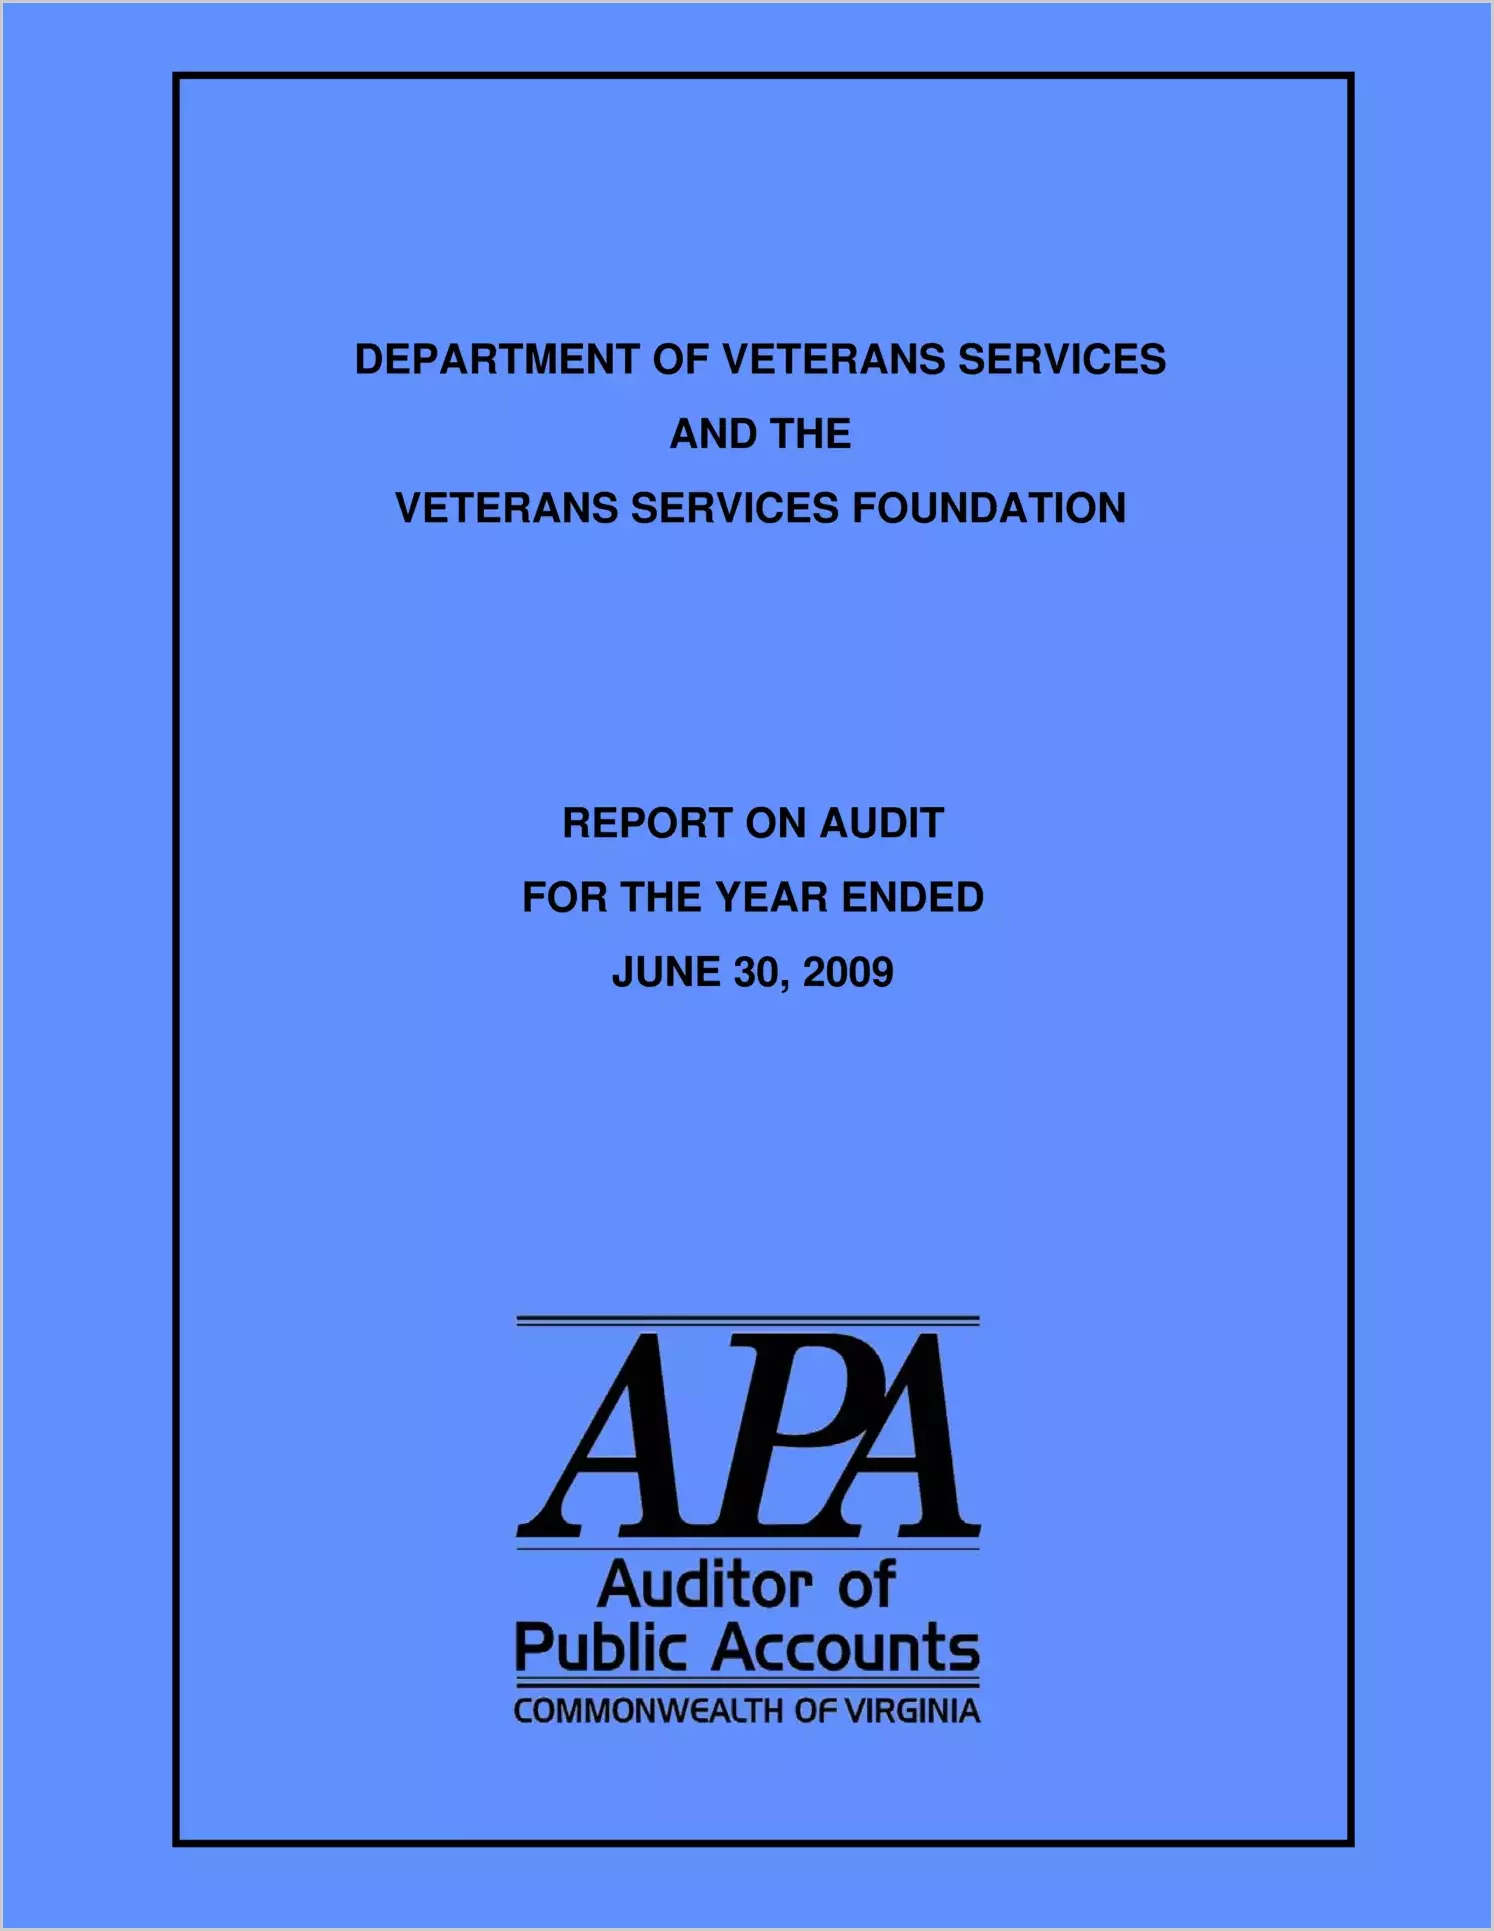 Department of Veterans Services and the Veterans Services Foundation for the year ended June 3, 2009